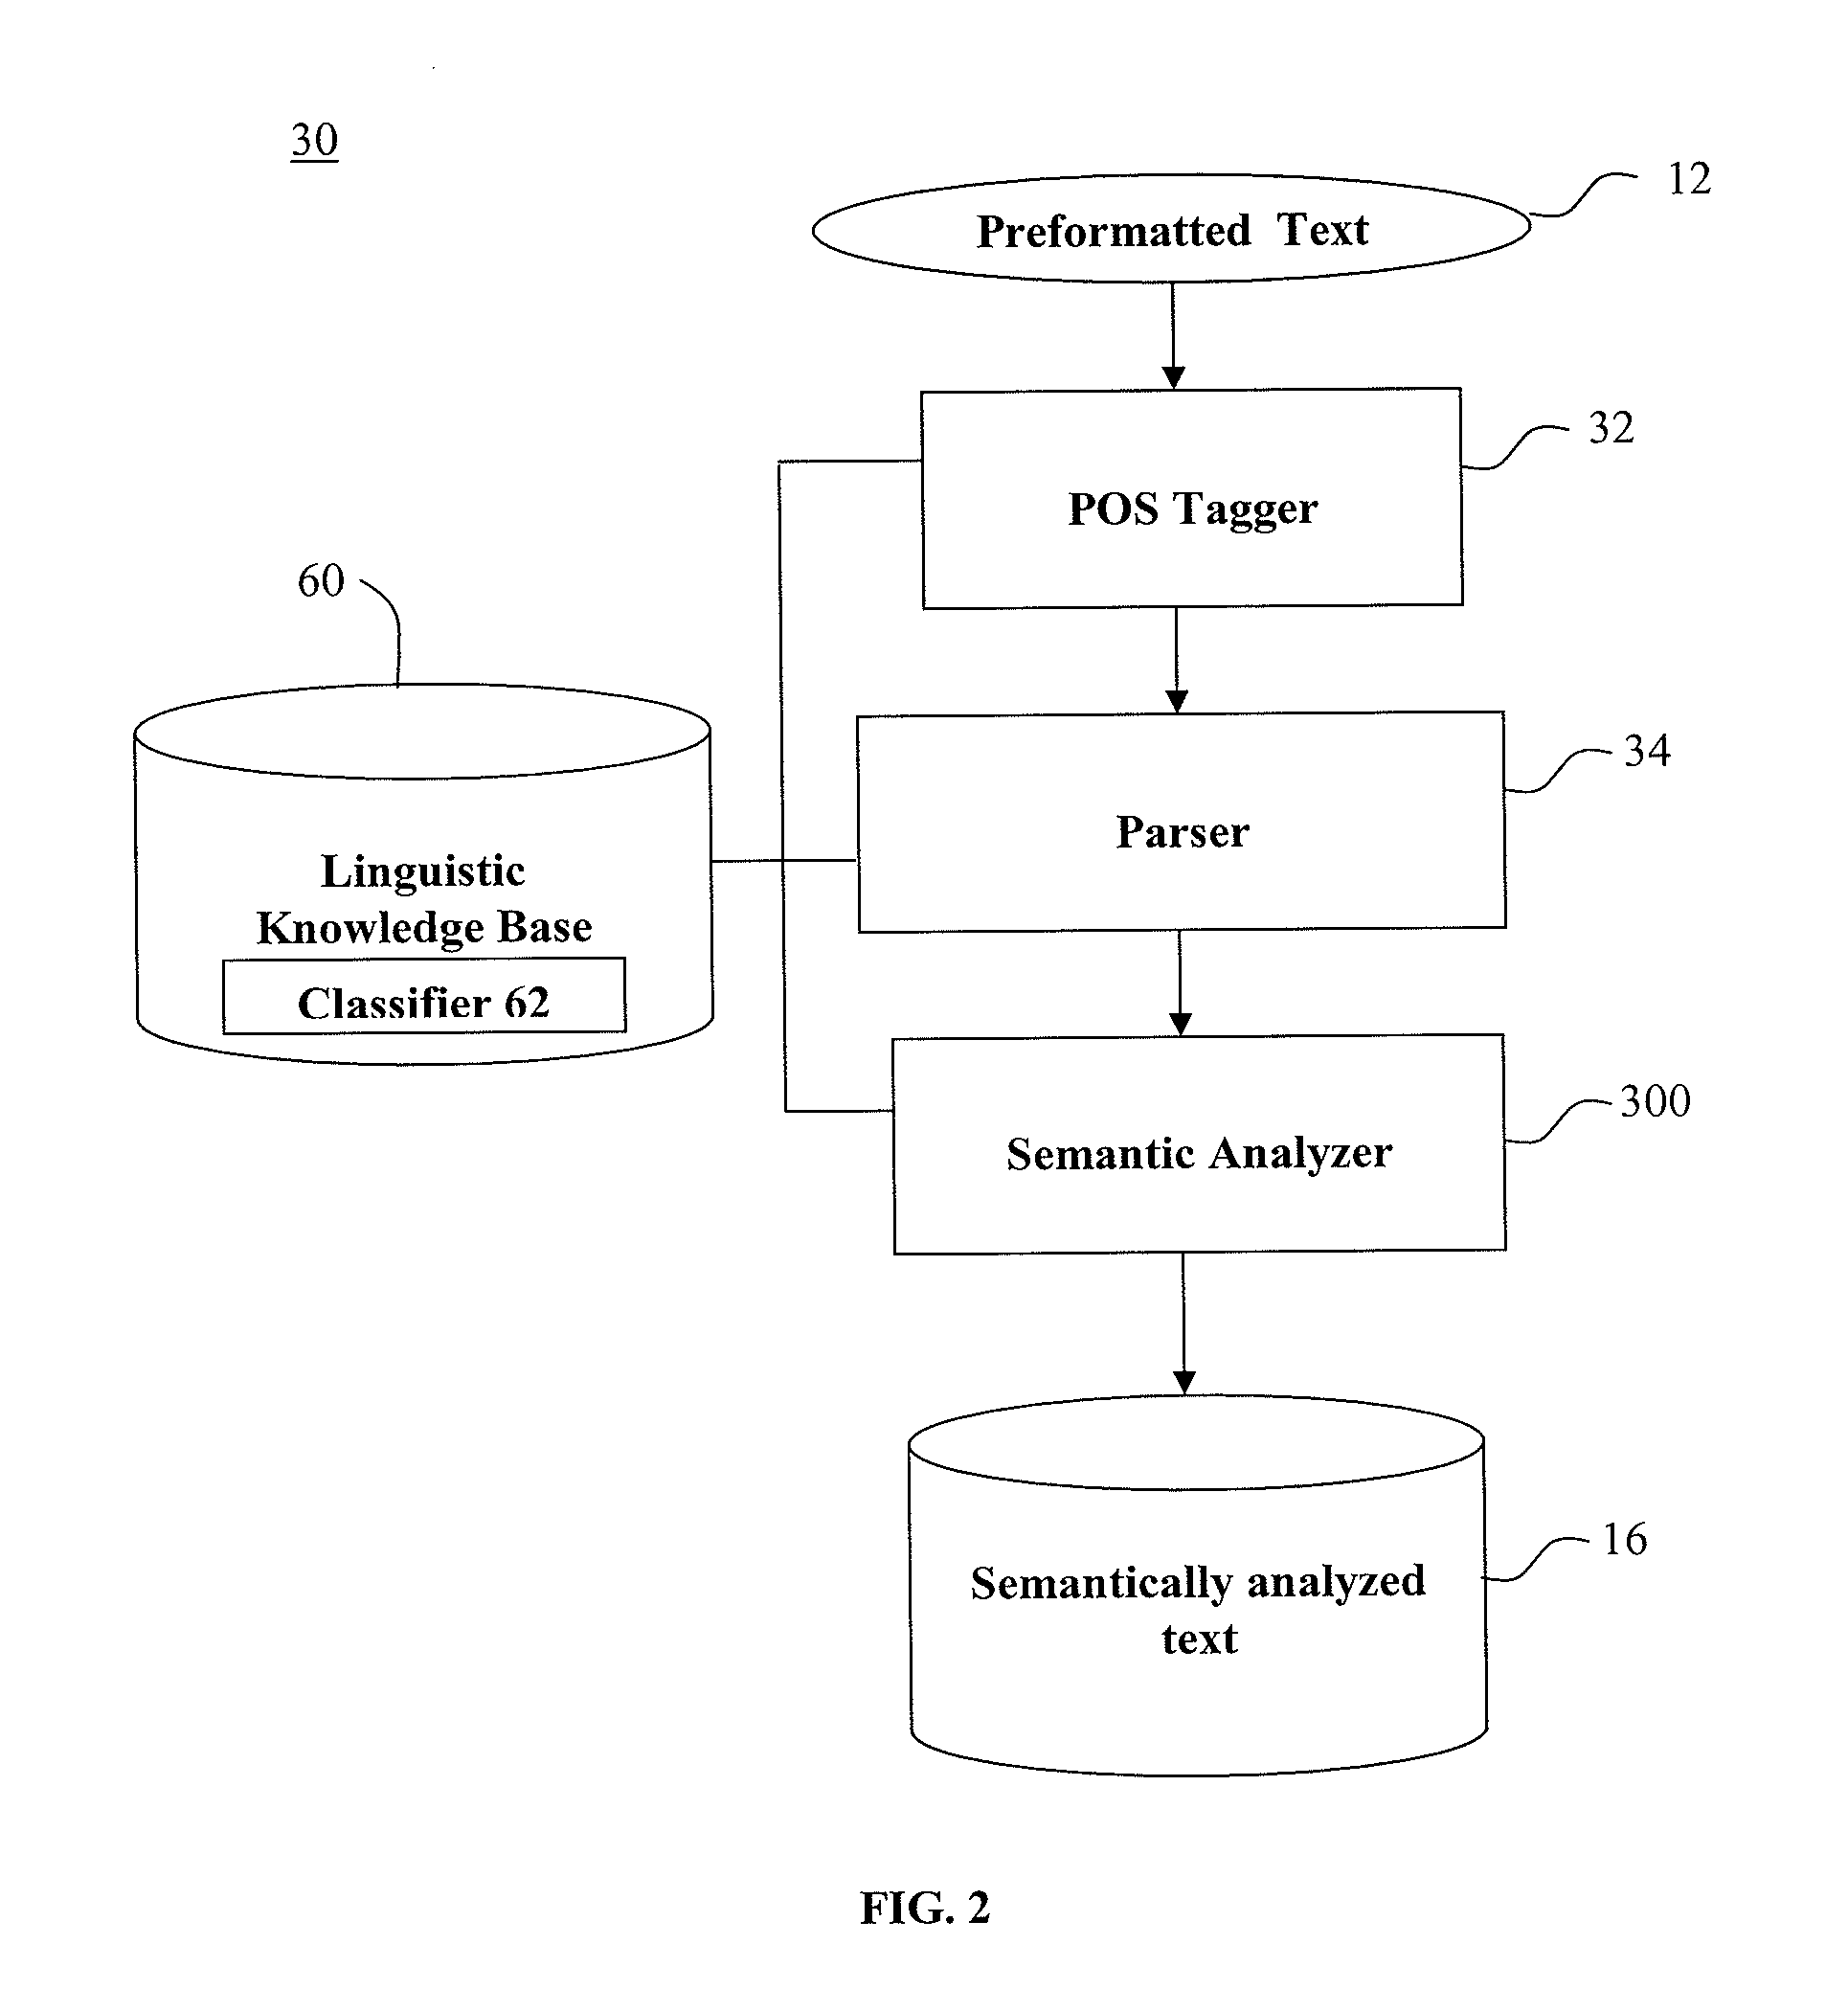 Question-answering system and method based on semantic labeling of text documents and user questions